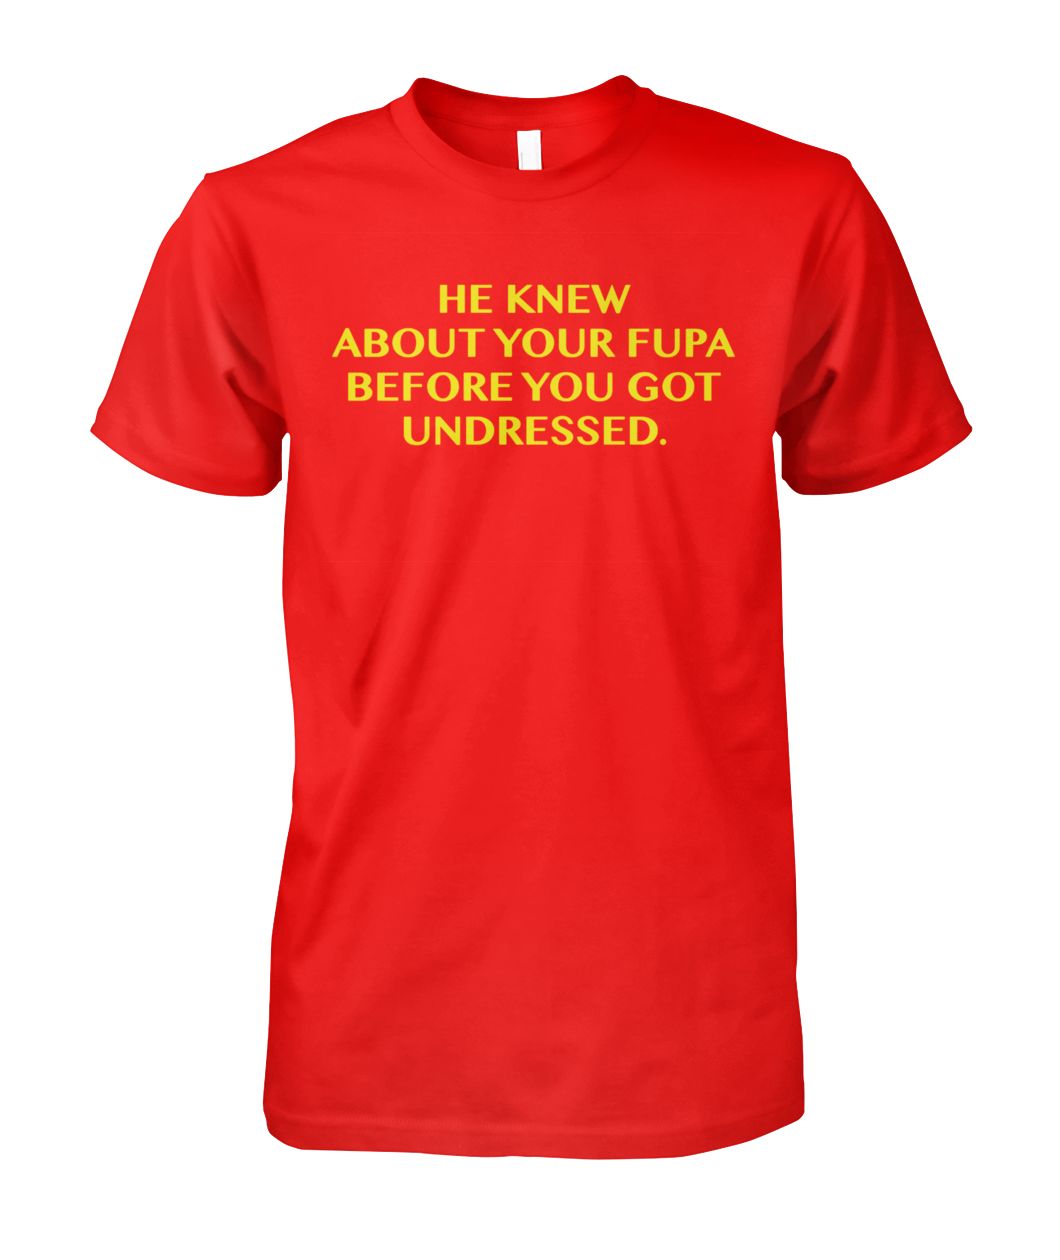 He knew about your fupa before got you undressed shirt